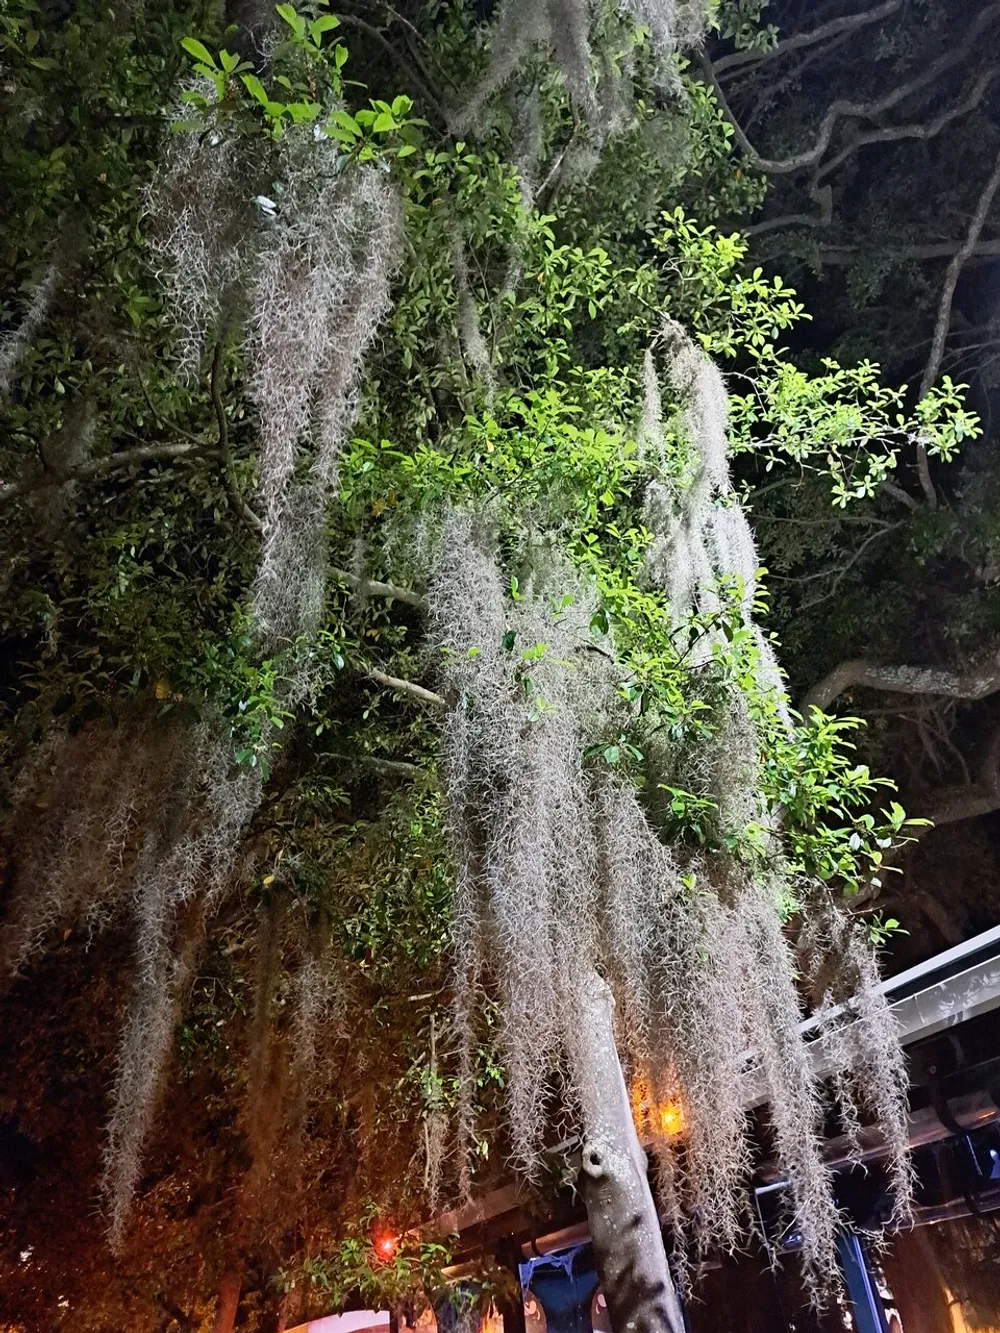 The image shows a tree at night its branches draped with long strands of Spanish moss illuminated from below by artificial light